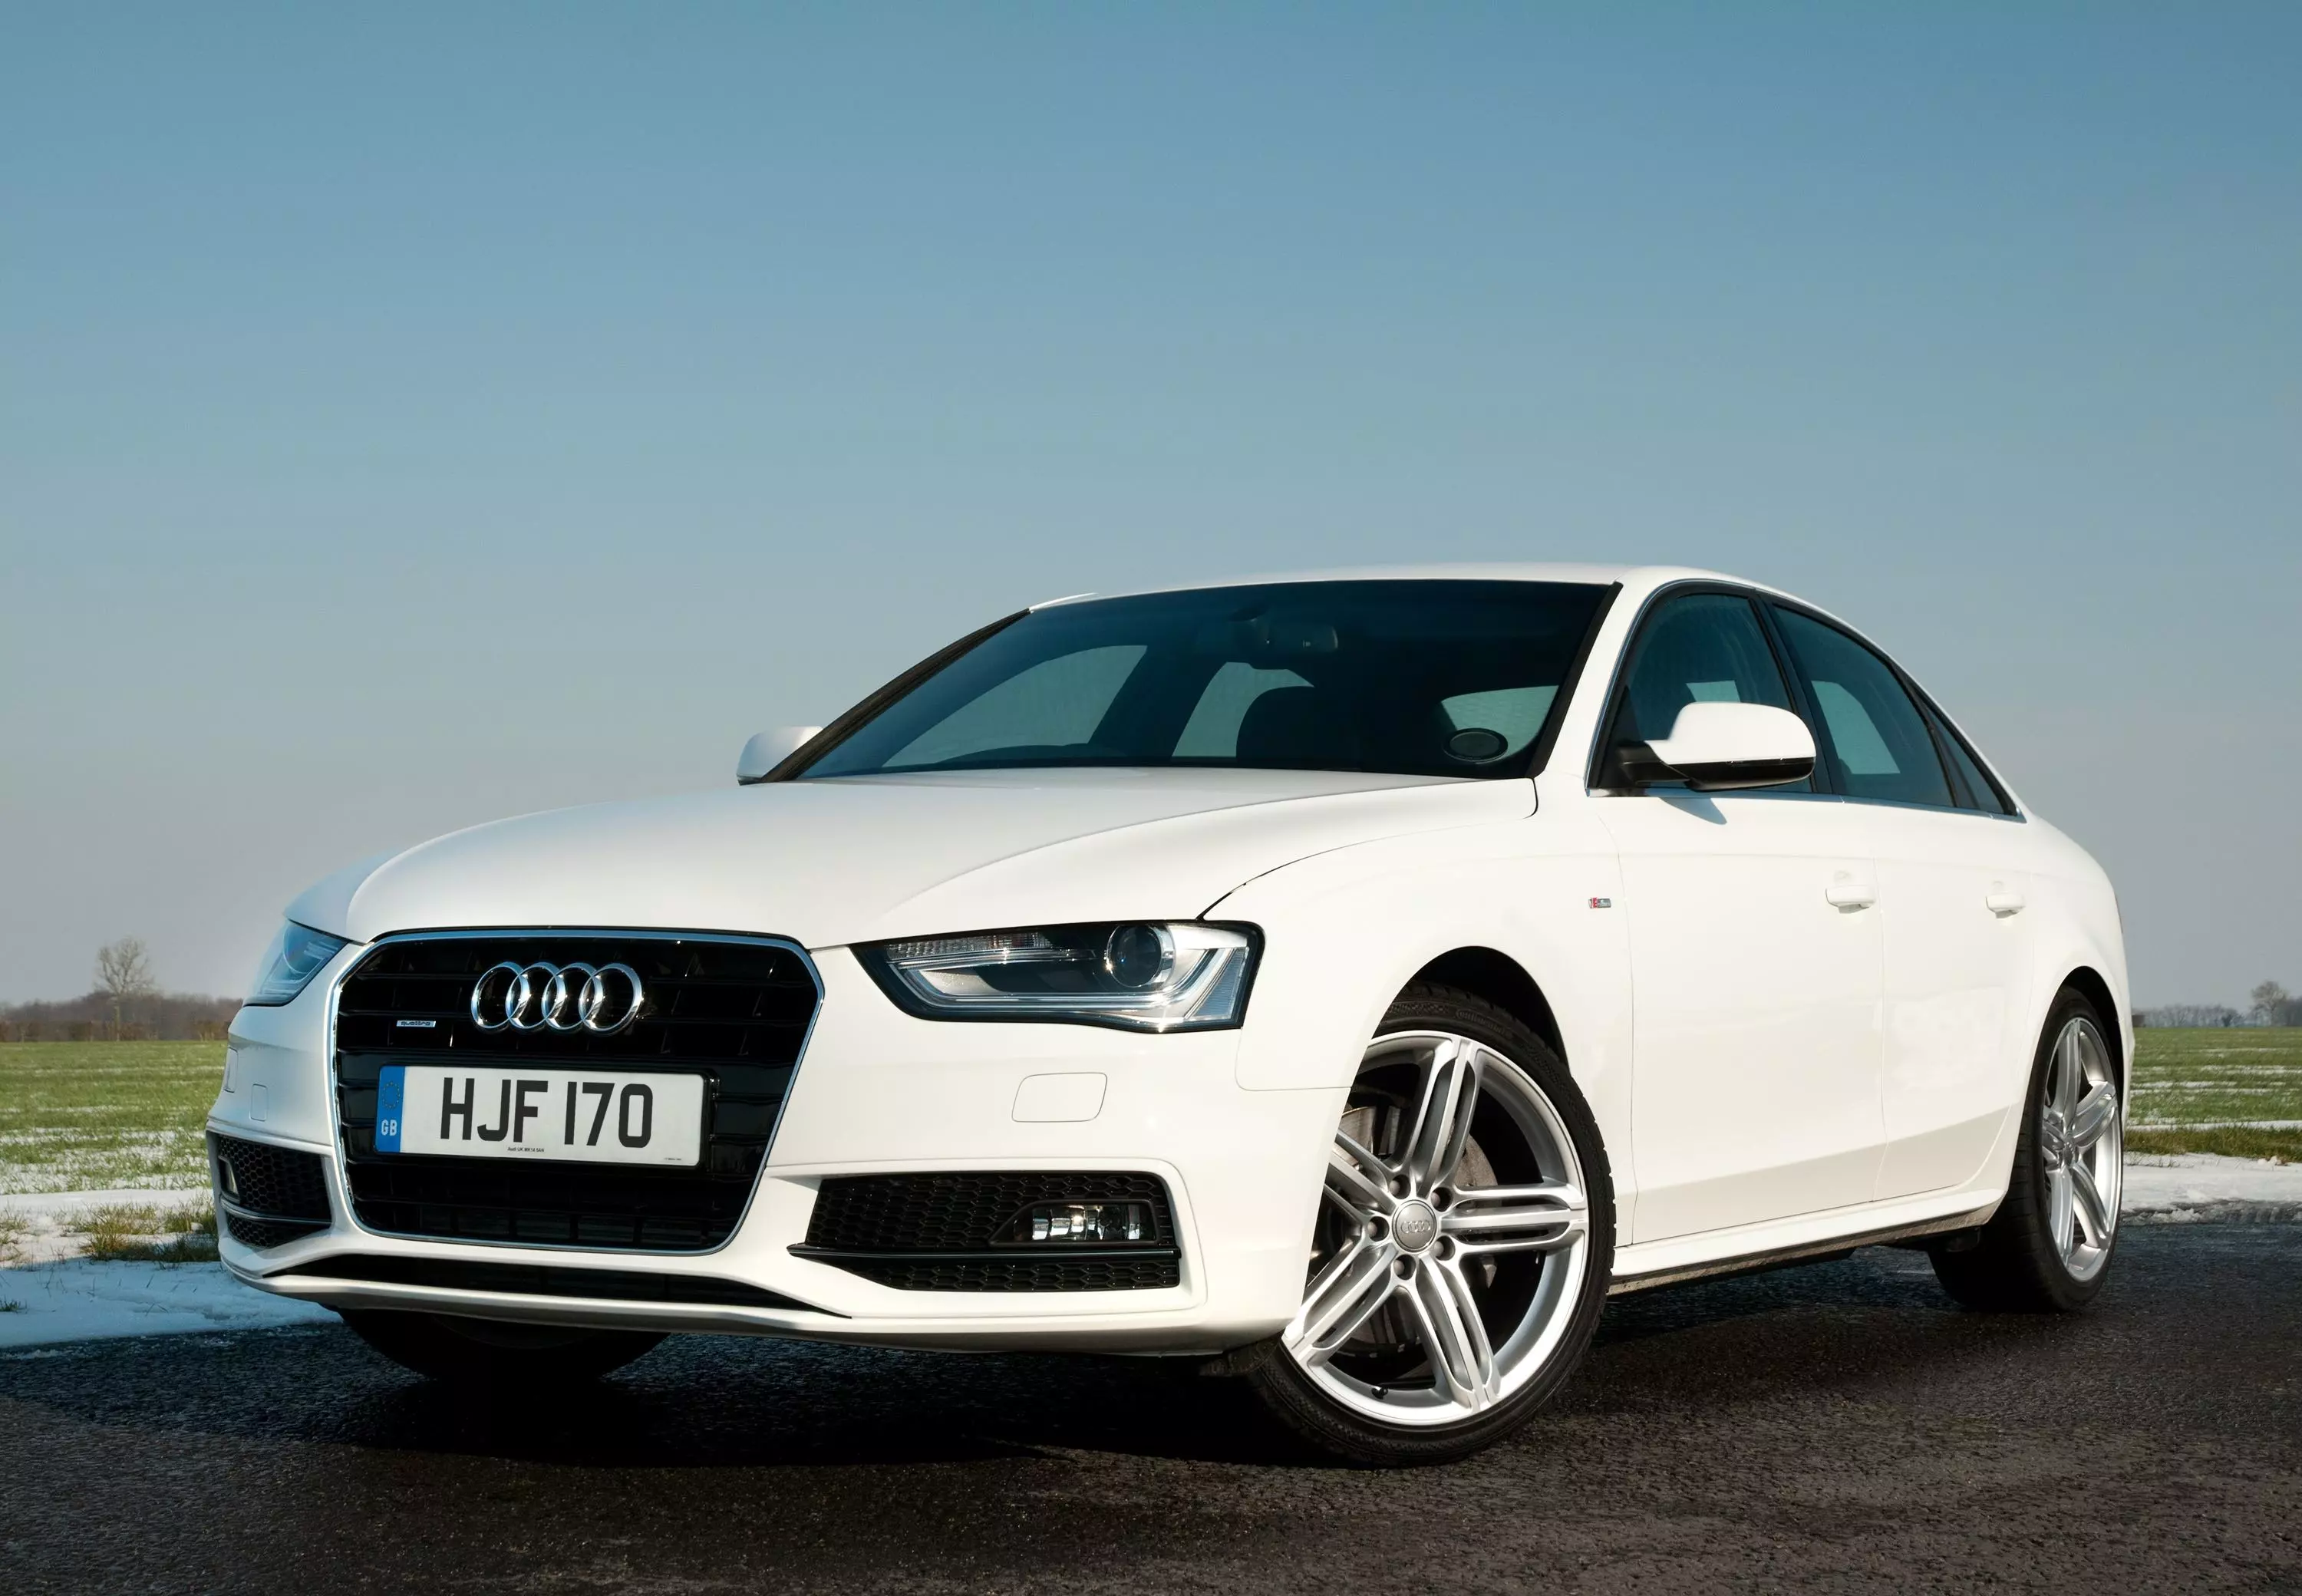 Audi A4 B8: General Information and Recommended Maintenance Schedule